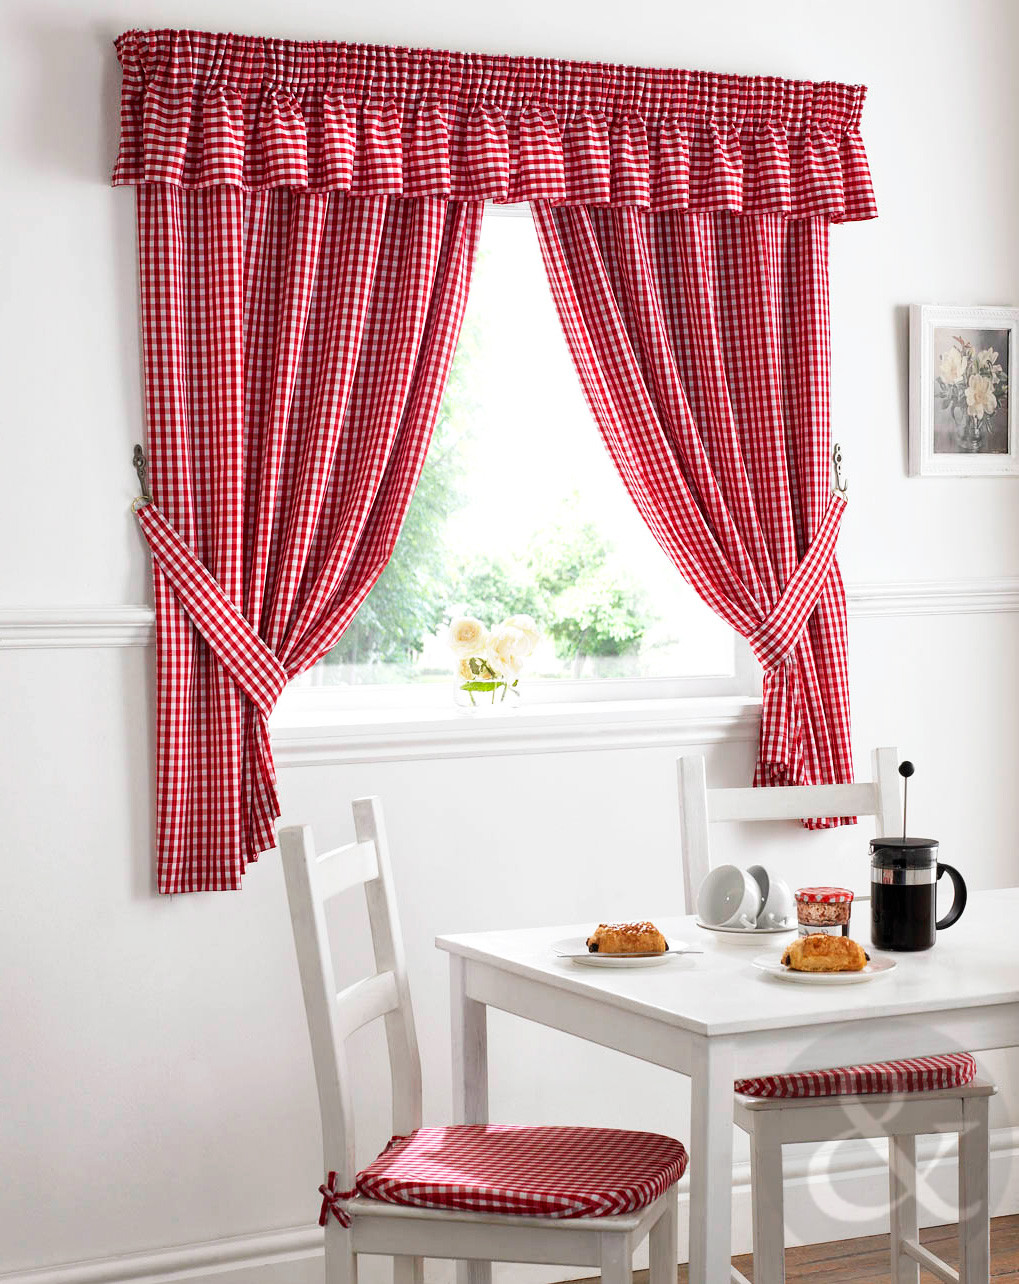 Red And White Kitchen Curtains
 Gingham Check Kitchen Curtains Ready Made Pencil Pleat Net